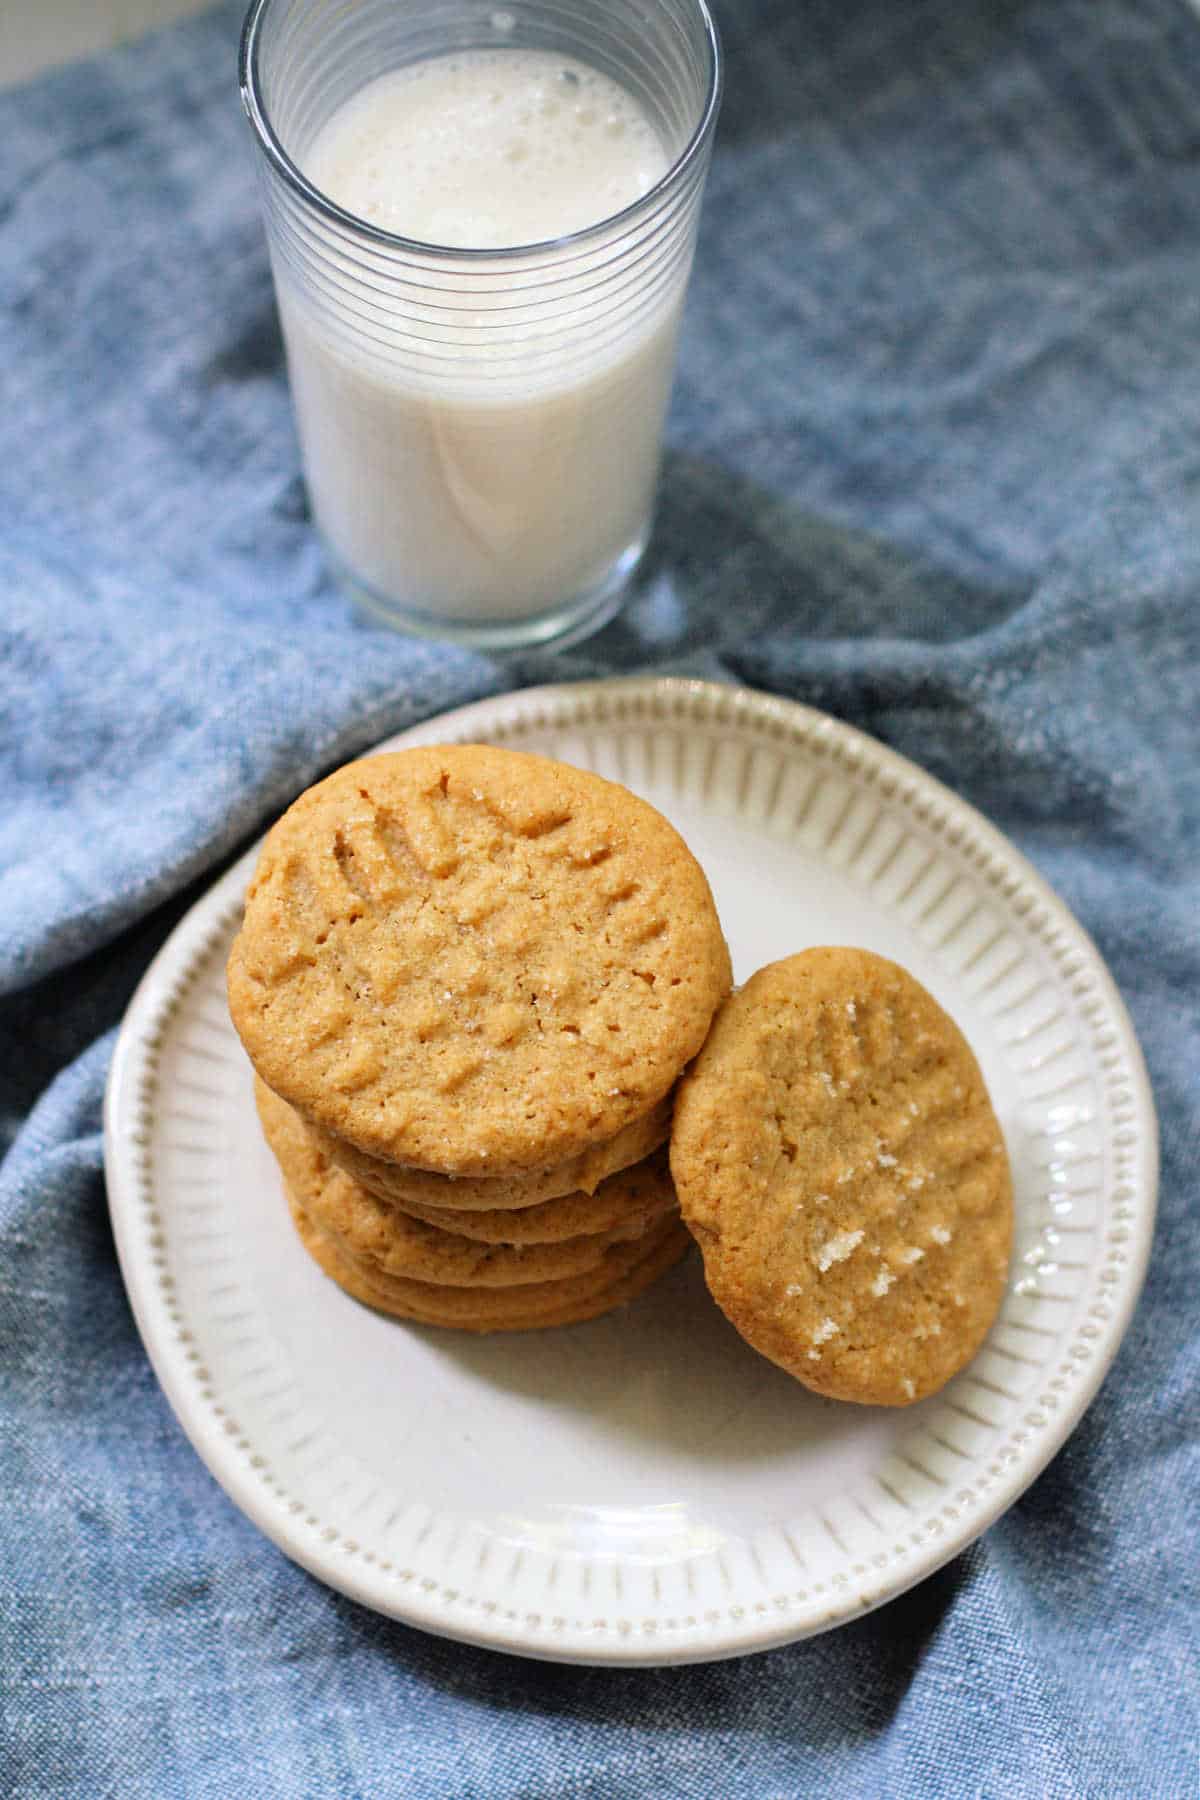 classic peanut butter cookies without gluten